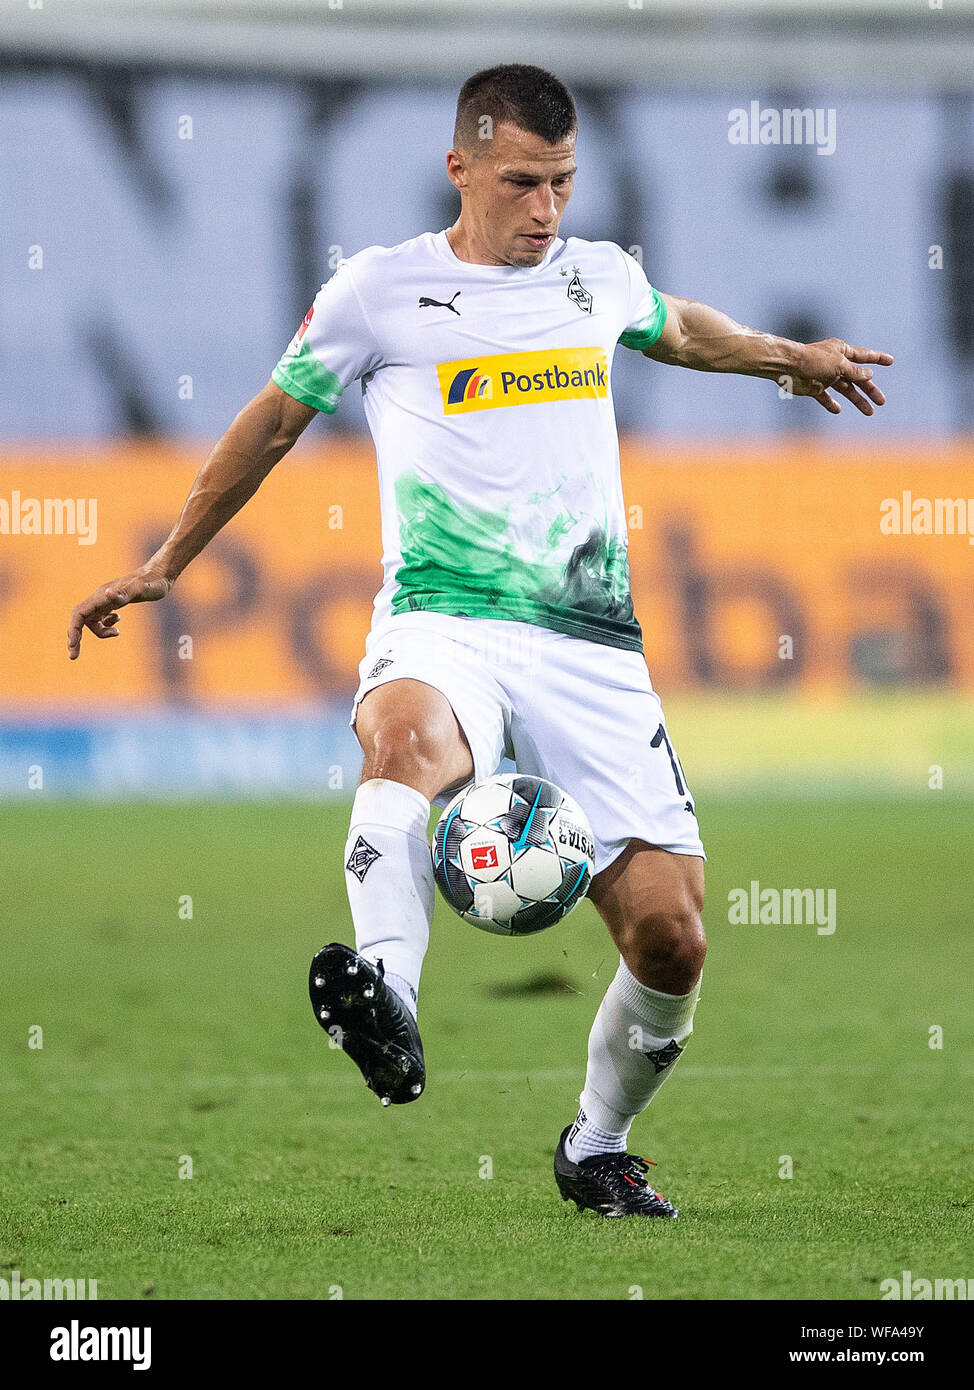 30 August 2019, North Rhine-Westphalia, Mönchengladbach: Soccer: Bundesliga, Borussia Mönchengladbach - RB Leipzig, Matchday 3. Gladbach's Stefan Lainer plays the ball. Photo: Marius Becker/dpa - IMPORTANT NOTE: In accordance with the requirements of the DFL Deutsche Fußball Liga or the DFB Deutscher Fußball-Bund, it is prohibited to use or have used photographs taken in the stadium and/or the match in the form of sequence images and/or video-like photo sequences. Stock Photo